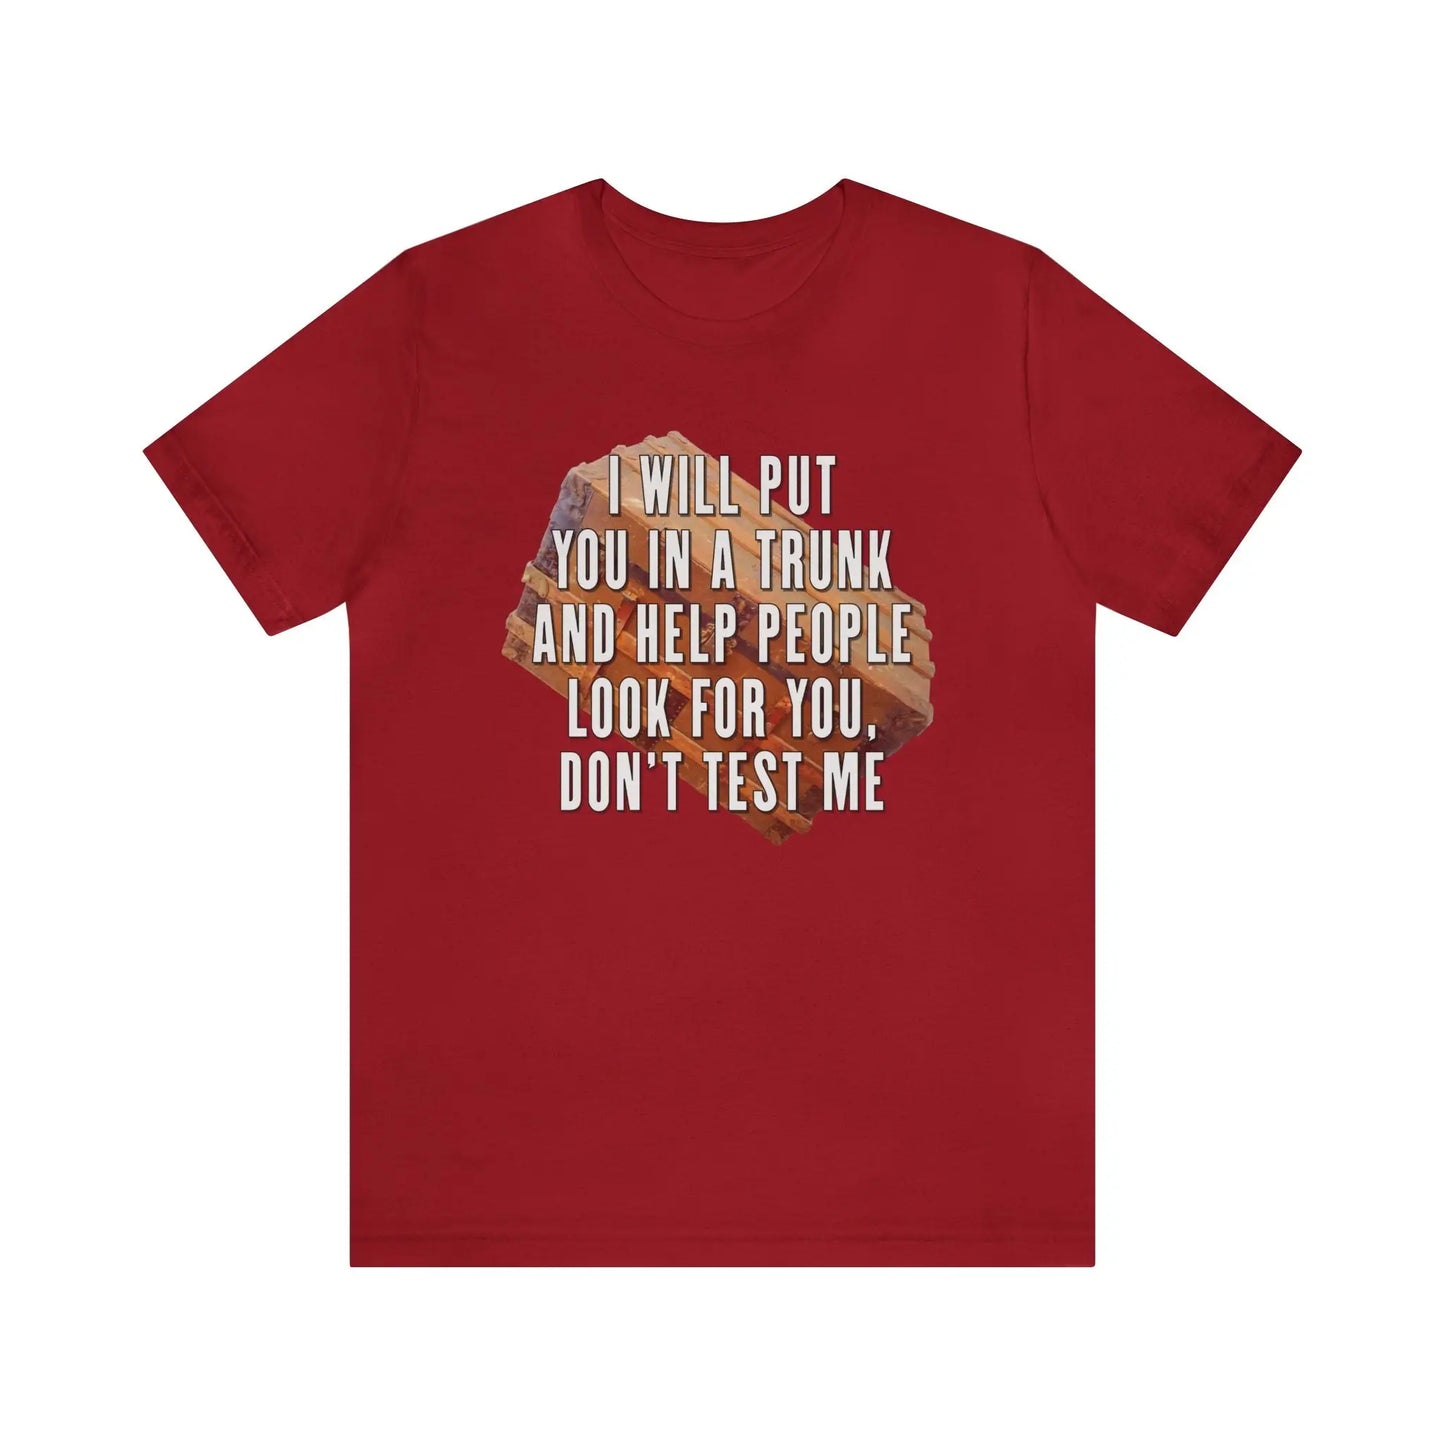 Put You In A Trunk Men's Short Sleeve Tee - Wicked Tees